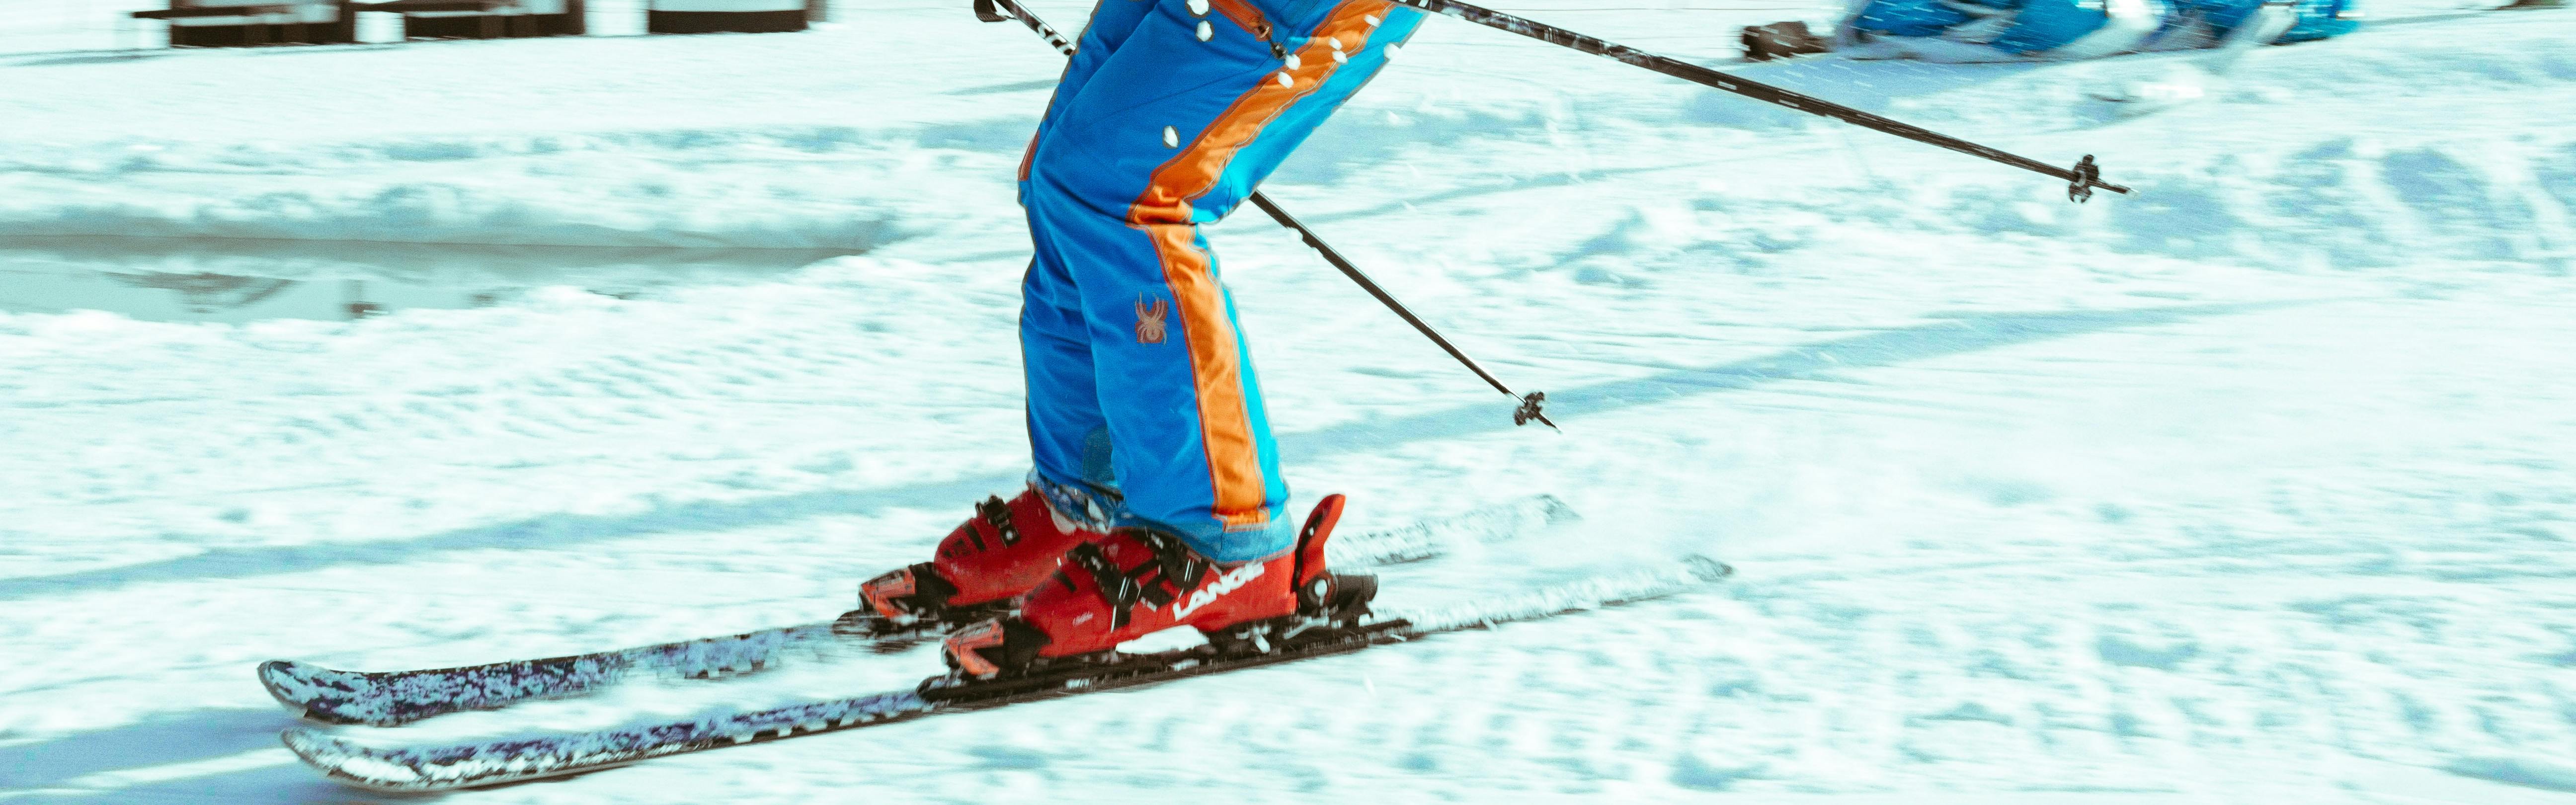 Close up of ski boots as a skier is turning down a snowy slope. 